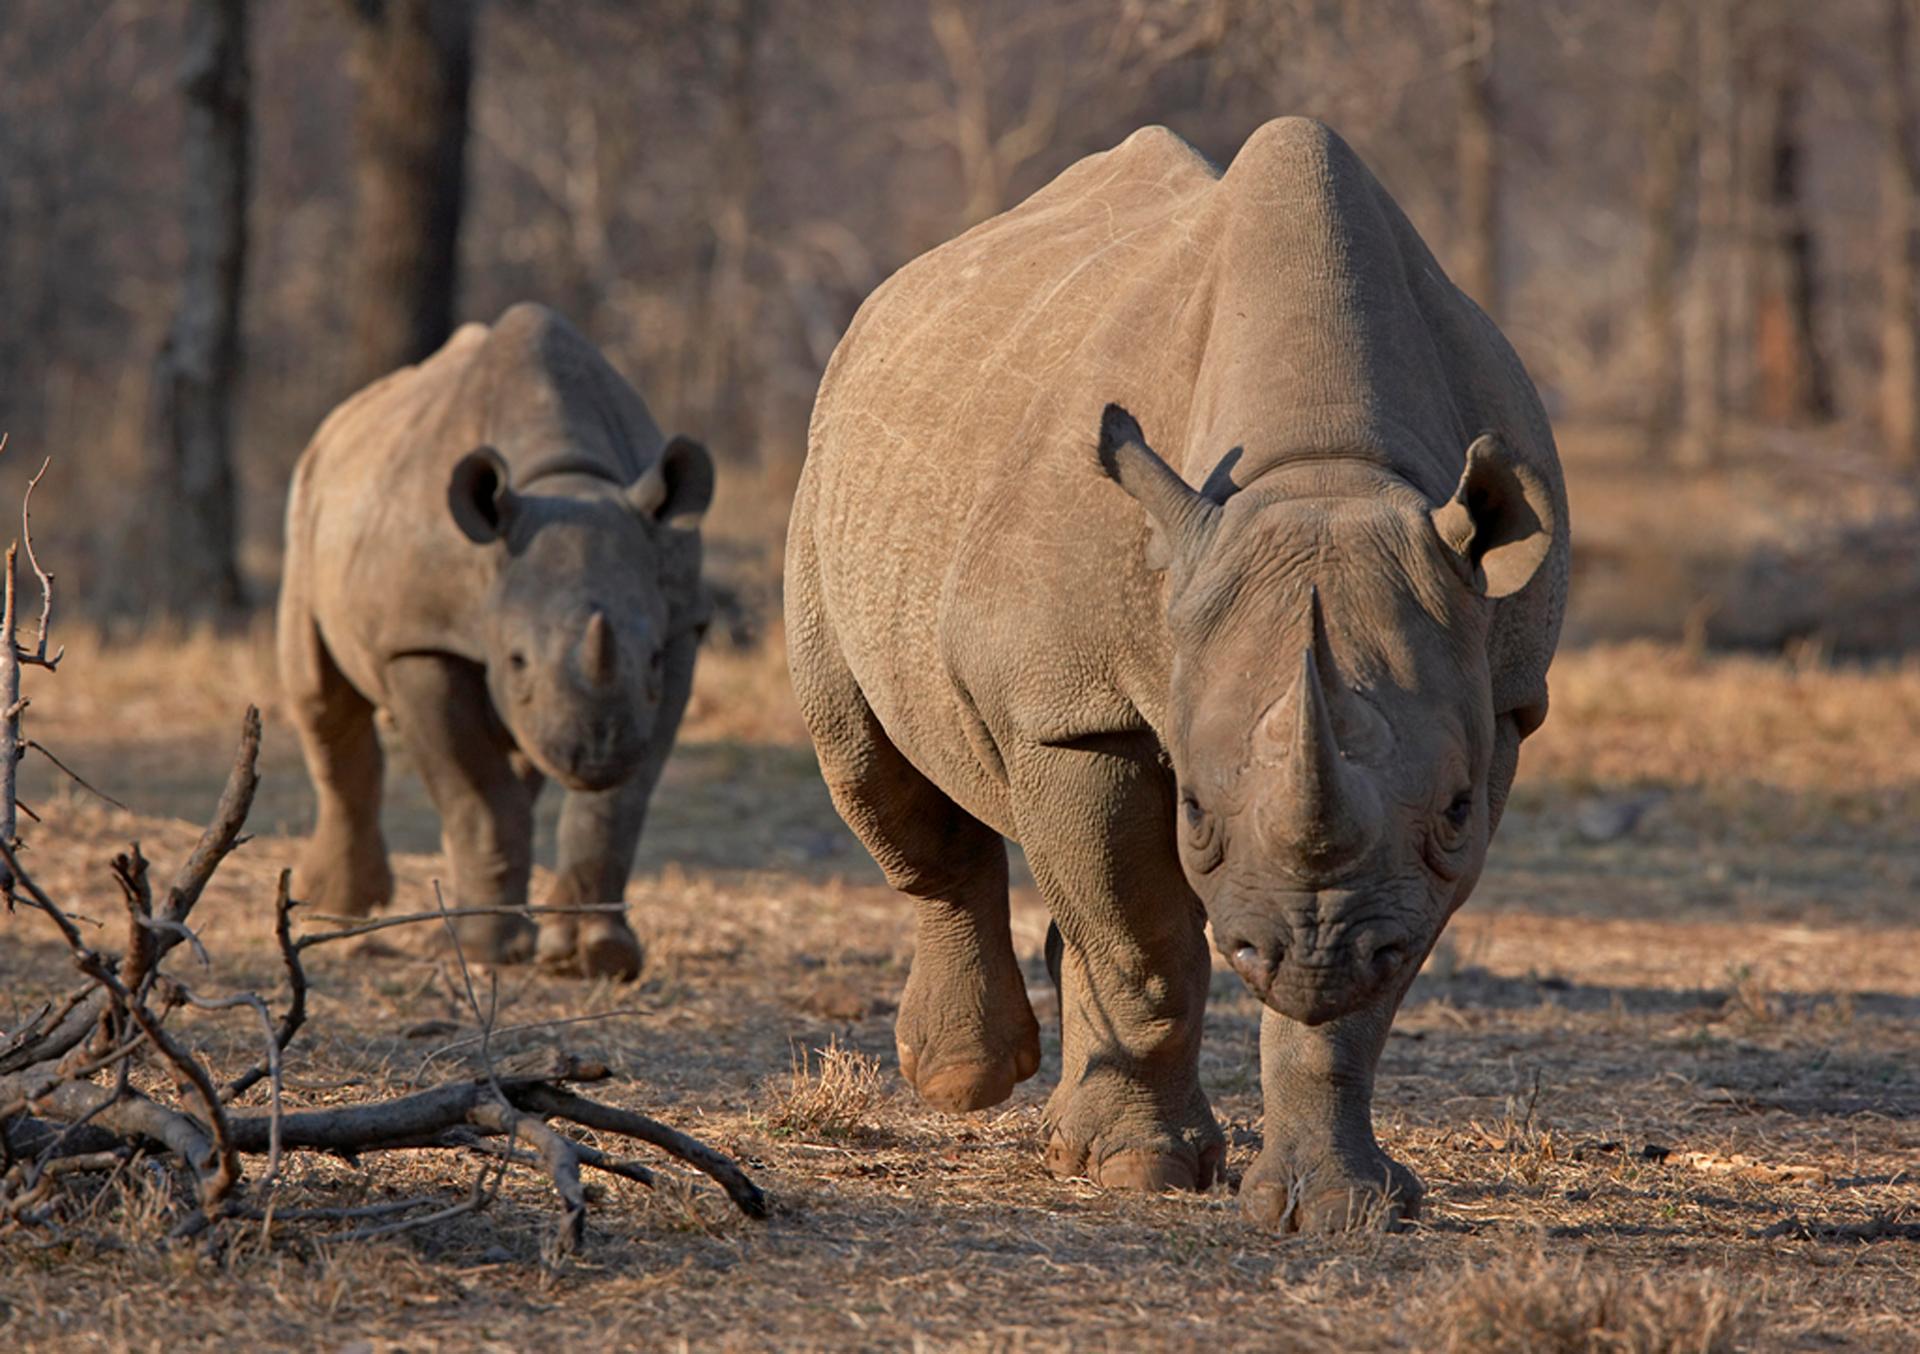 More than 1,000 rhinos were killed in South Africa last year. It's a 50% increase from the year before, proof of the escalating poaching crisis. Most of the rhinos were killed in Kruger National Park, a popular tourist destination.